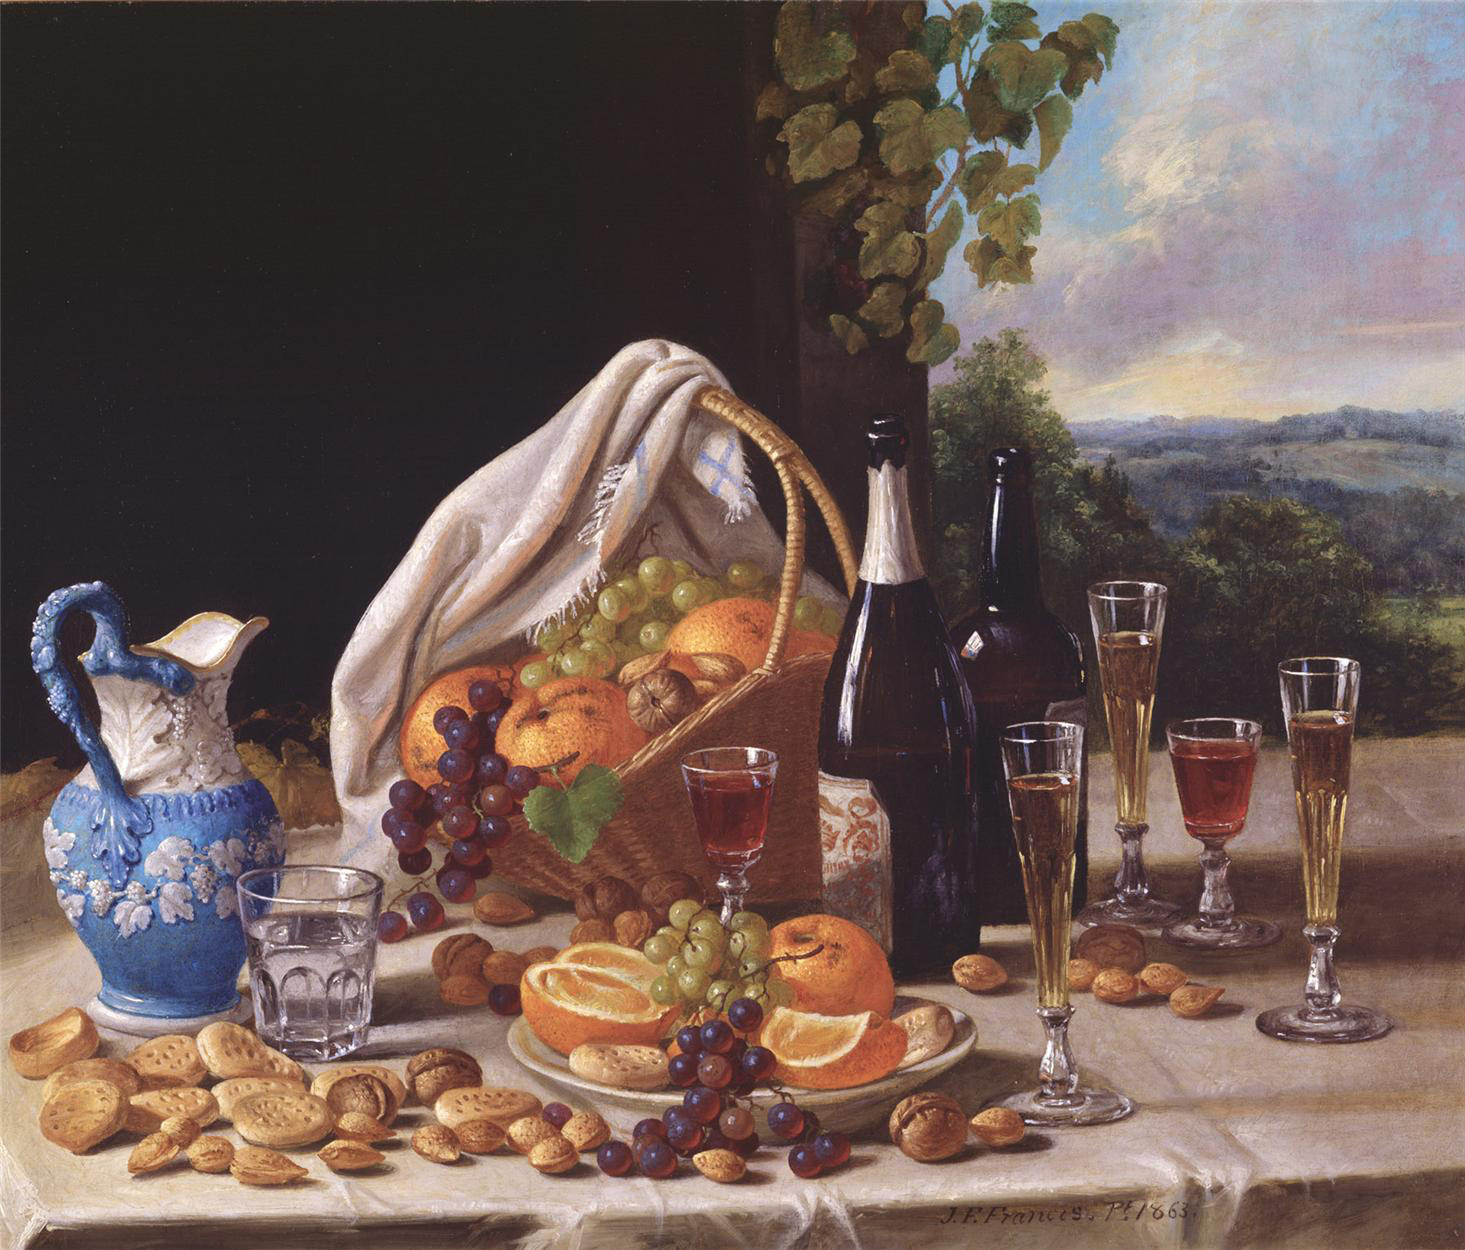 This still life features various drinks, in jugs, bottles, champagne flutes and more. The style is more painterly with subdued colors